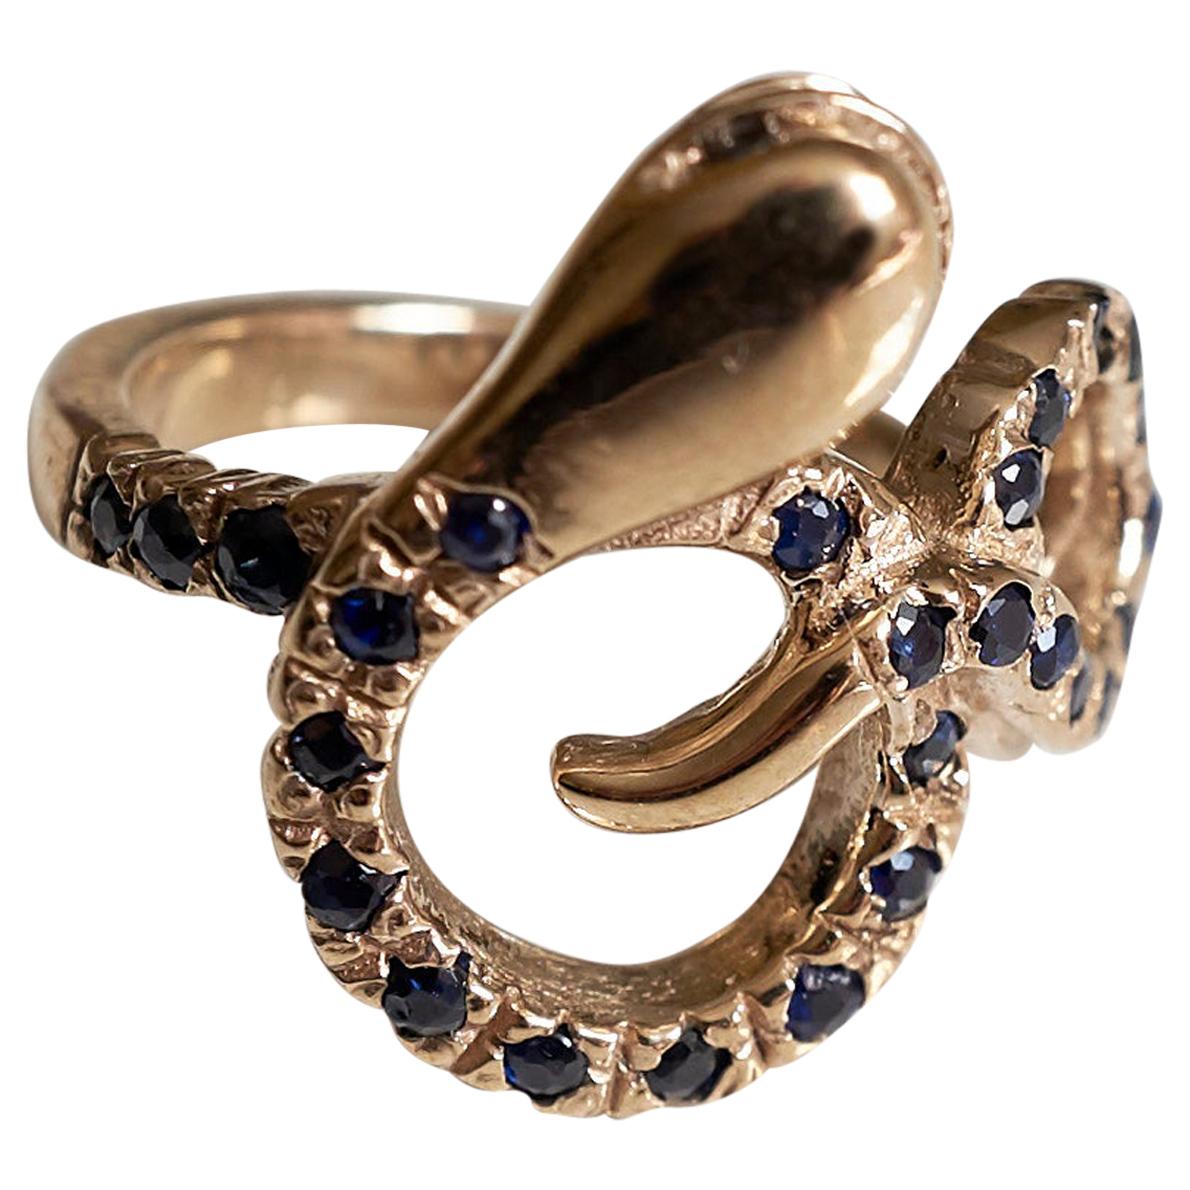 Brilliant Cut Black Diamond Aquamarine Ring Gold Snake Cocktail Ring Victorian Style J Dauphin For Sale